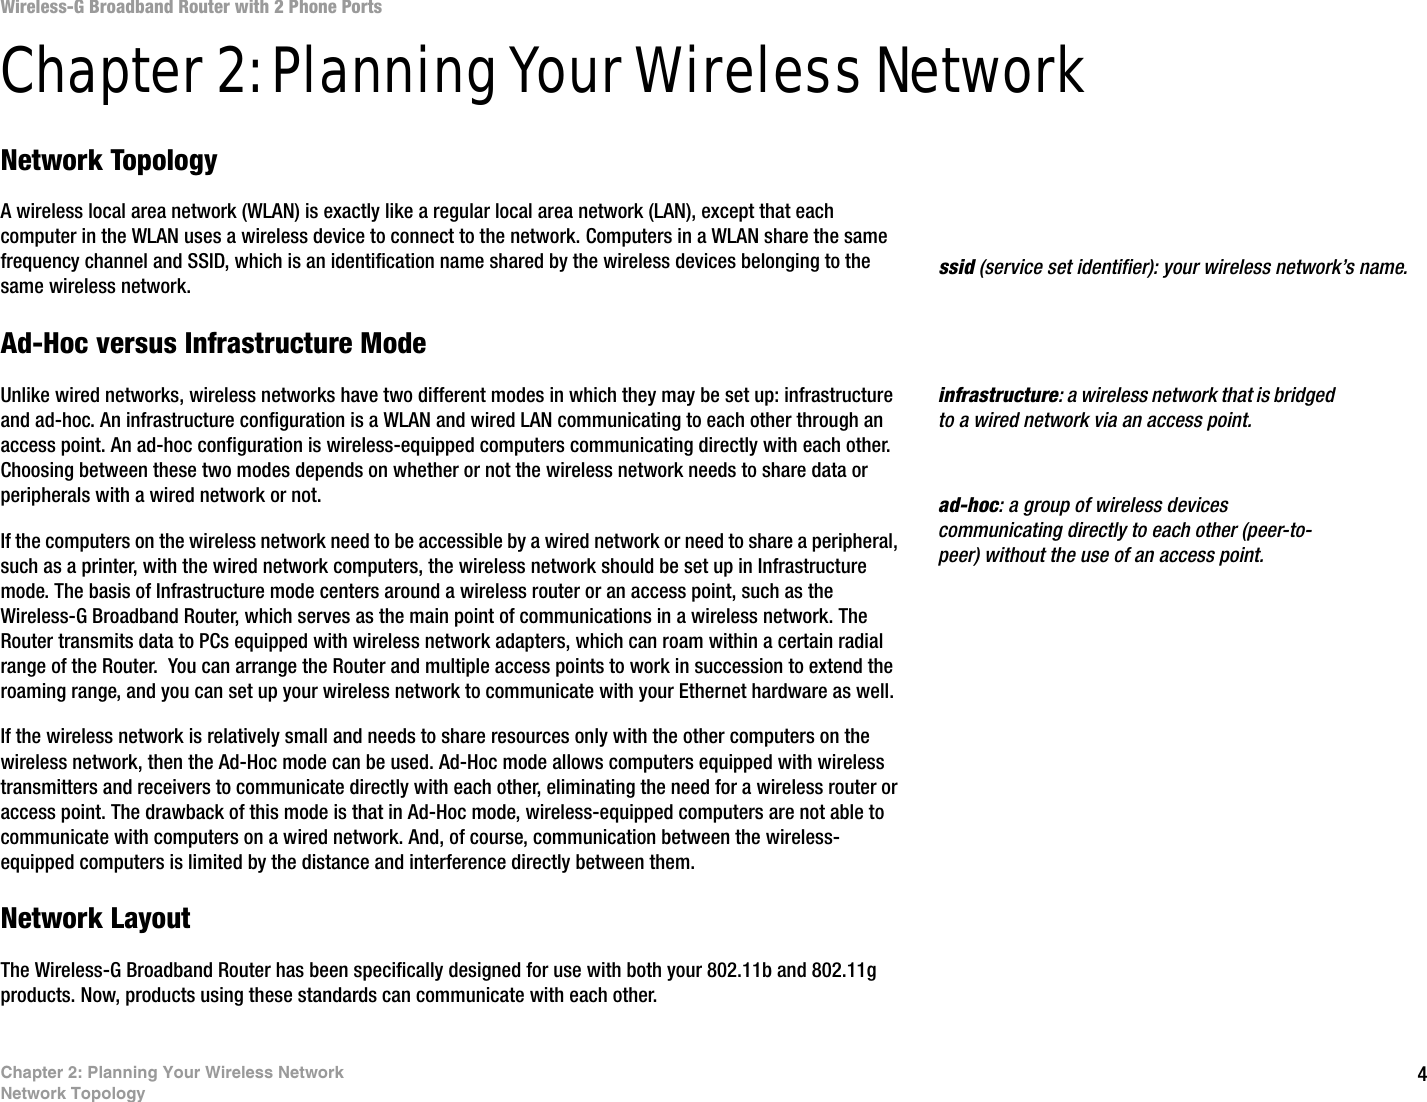 4Chapter 2: Planning Your Wireless NetworkNetwork TopologyWireless-G Broadband Router with 2 Phone PortsChapter 2: Planning Your Wireless NetworkNetwork TopologyA wireless local area network (WLAN) is exactly like a regular local area network (LAN), except that each computer in the WLAN uses a wireless device to connect to the network. Computers in a WLAN share the same frequency channel and SSID, which is an identification name shared by the wireless devices belonging to the same wireless network.Ad-Hoc versus Infrastructure ModeUnlike wired networks, wireless networks have two different modes in which they may be set up: infrastructure and ad-hoc. An infrastructure configuration is a WLAN and wired LAN communicating to each other through an access point. An ad-hoc configuration is wireless-equipped computers communicating directly with each other. Choosing between these two modes depends on whether or not the wireless network needs to share data or peripherals with a wired network or not. If the computers on the wireless network need to be accessible by a wired network or need to share a peripheral, such as a printer, with the wired network computers, the wireless network should be set up in Infrastructure mode. The basis of Infrastructure mode centers around a wireless router or an access point, such as the Wireless-G Broadband Router, which serves as the main point of communications in a wireless network. The Router transmits data to PCs equipped with wireless network adapters, which can roam within a certain radial range of the Router.  You can arrange the Router and multiple access points to work in succession to extend the roaming range, and you can set up your wireless network to communicate with your Ethernet hardware as well. If the wireless network is relatively small and needs to share resources only with the other computers on the wireless network, then the Ad-Hoc mode can be used. Ad-Hoc mode allows computers equipped with wireless transmitters and receivers to communicate directly with each other, eliminating the need for a wireless router or access point. The drawback of this mode is that in Ad-Hoc mode, wireless-equipped computers are not able to communicate with computers on a wired network. And, of course, communication between the wireless-equipped computers is limited by the distance and interference directly between them. Network LayoutThe Wireless-G Broadband Router has been specifically designed for use with both your 802.11b and 802.11g products. Now, products using these standards can communicate with each other.infrastructure: a wireless network that is bridged to a wired network via an access point.ssid (service set identifier): your wireless network’s name.ad-hoc: a group of wireless devices communicating directly to each other (peer-to-peer) without the use of an access point.